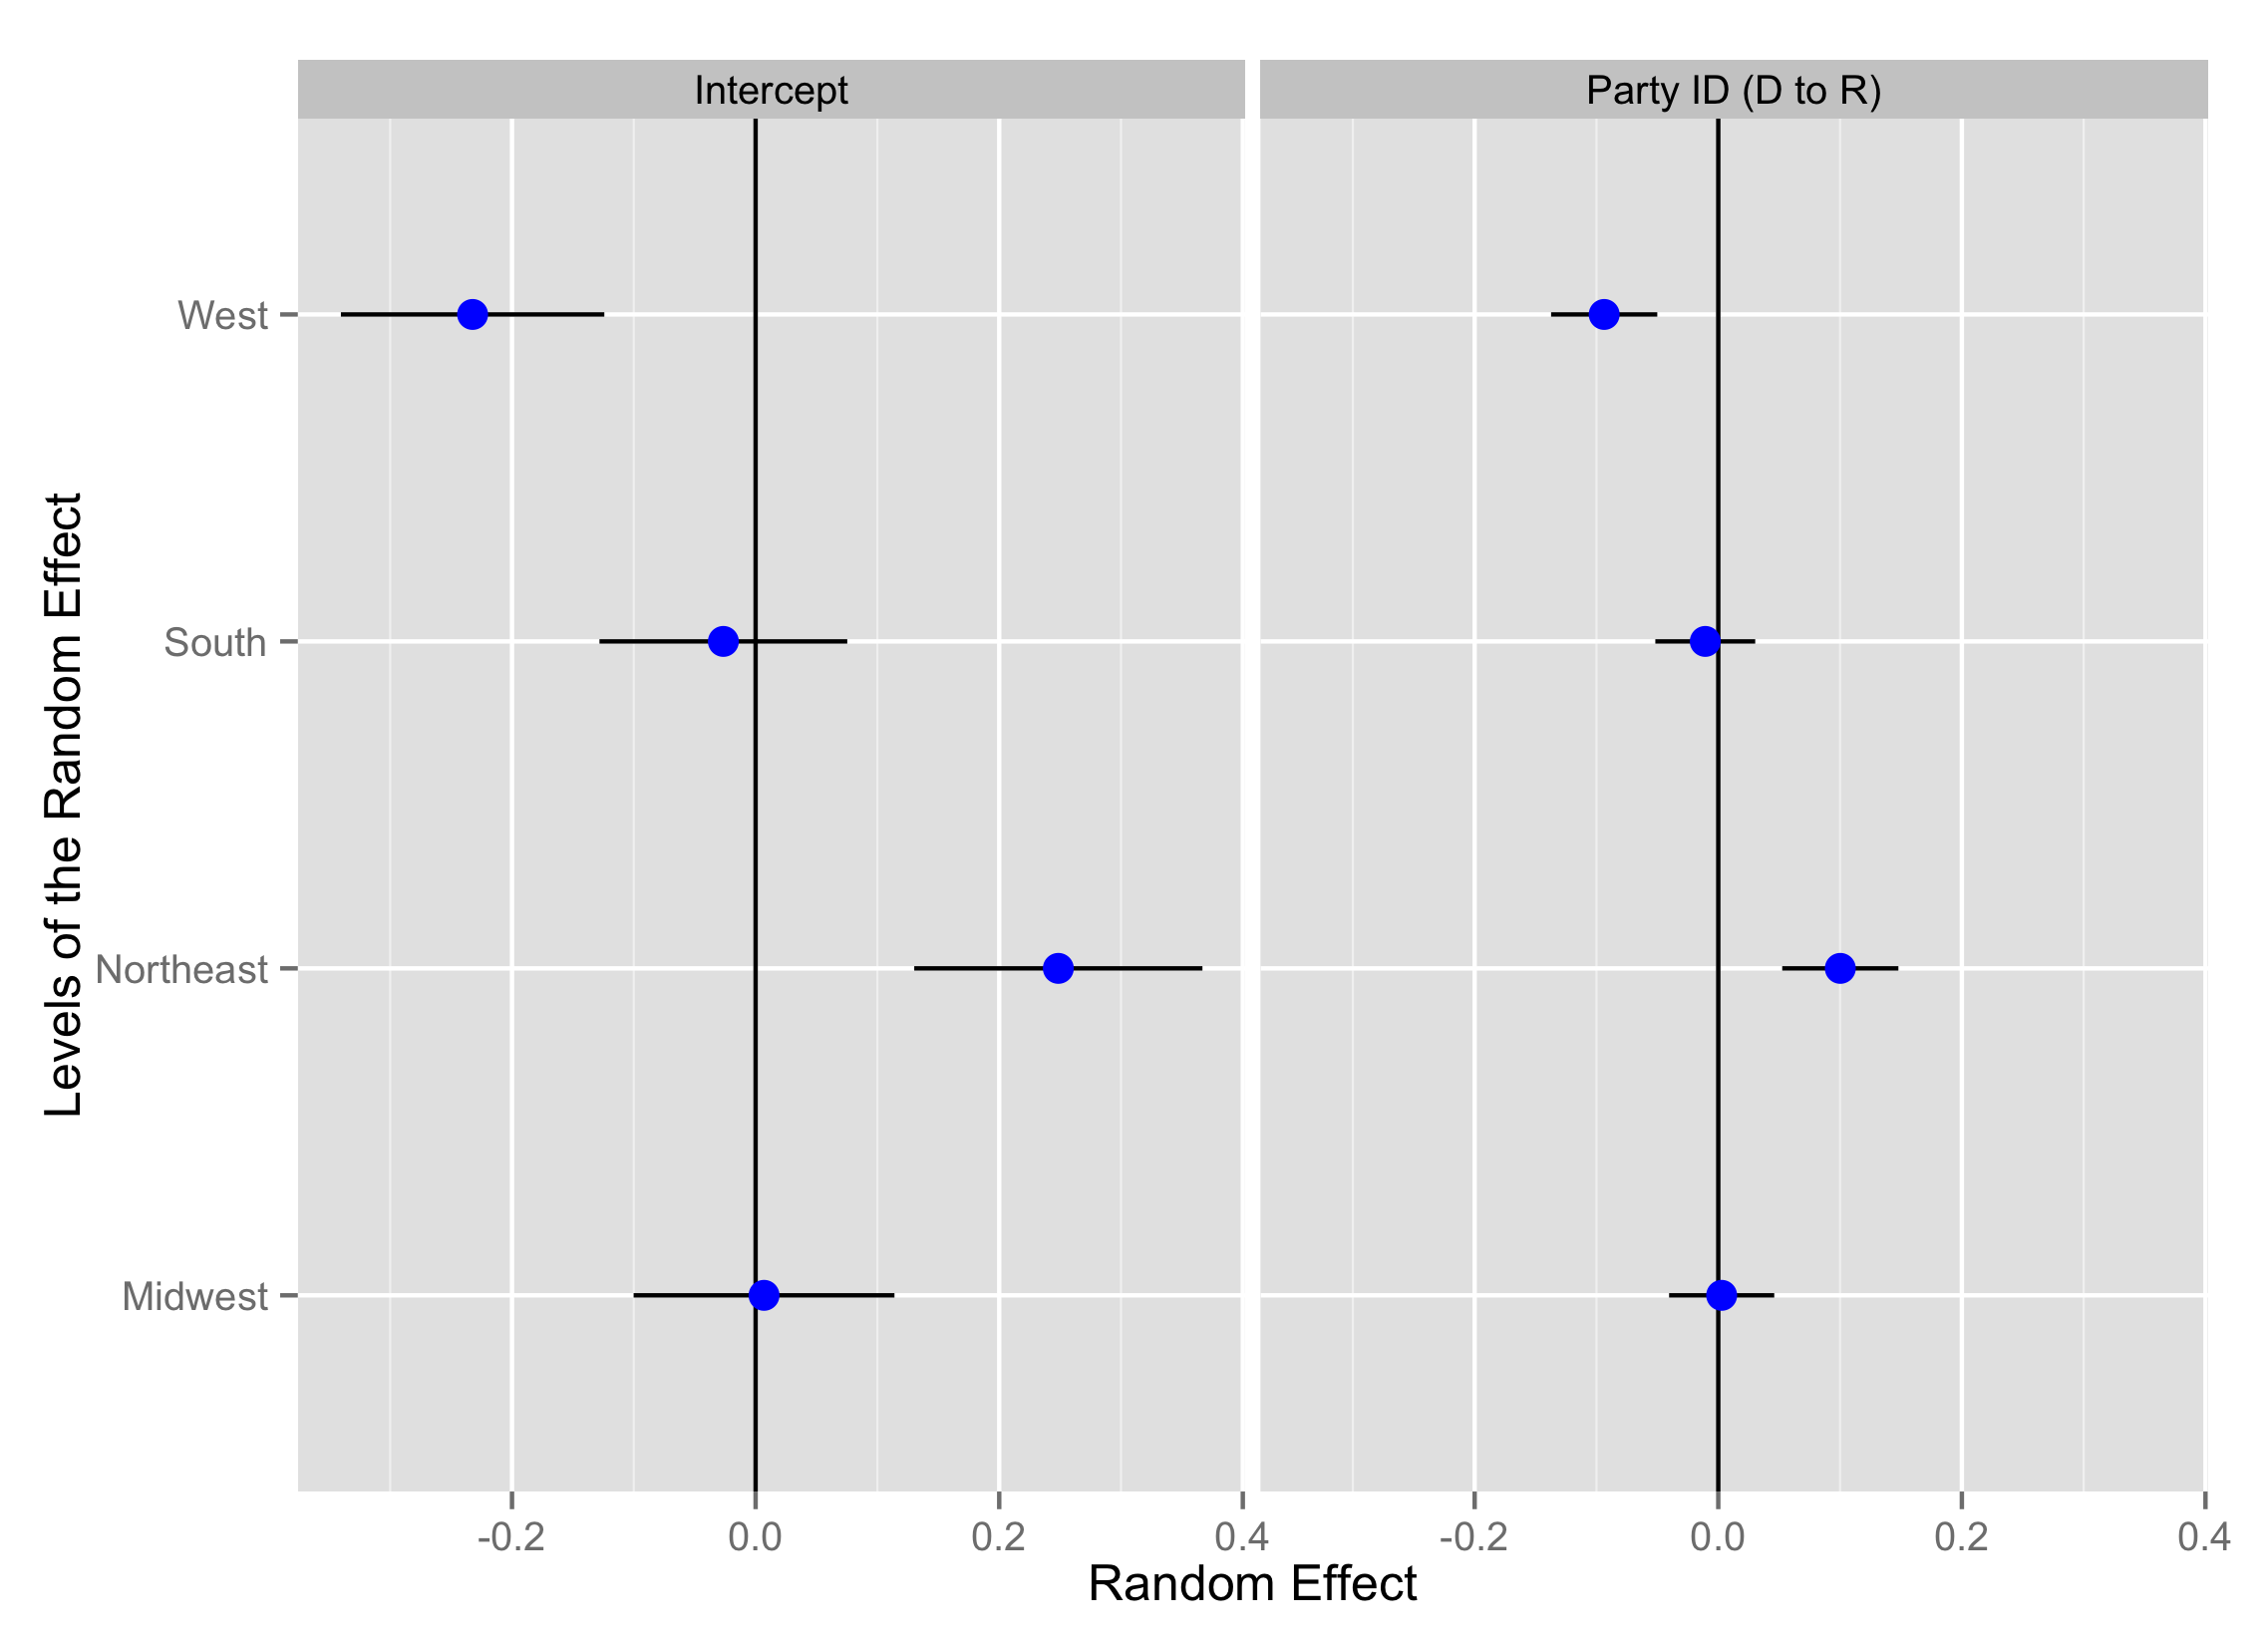 A caterpillar plot of the random effects in Model 1 (support for police permits) with random intercept for region and random slope for party ID (1994-2014).